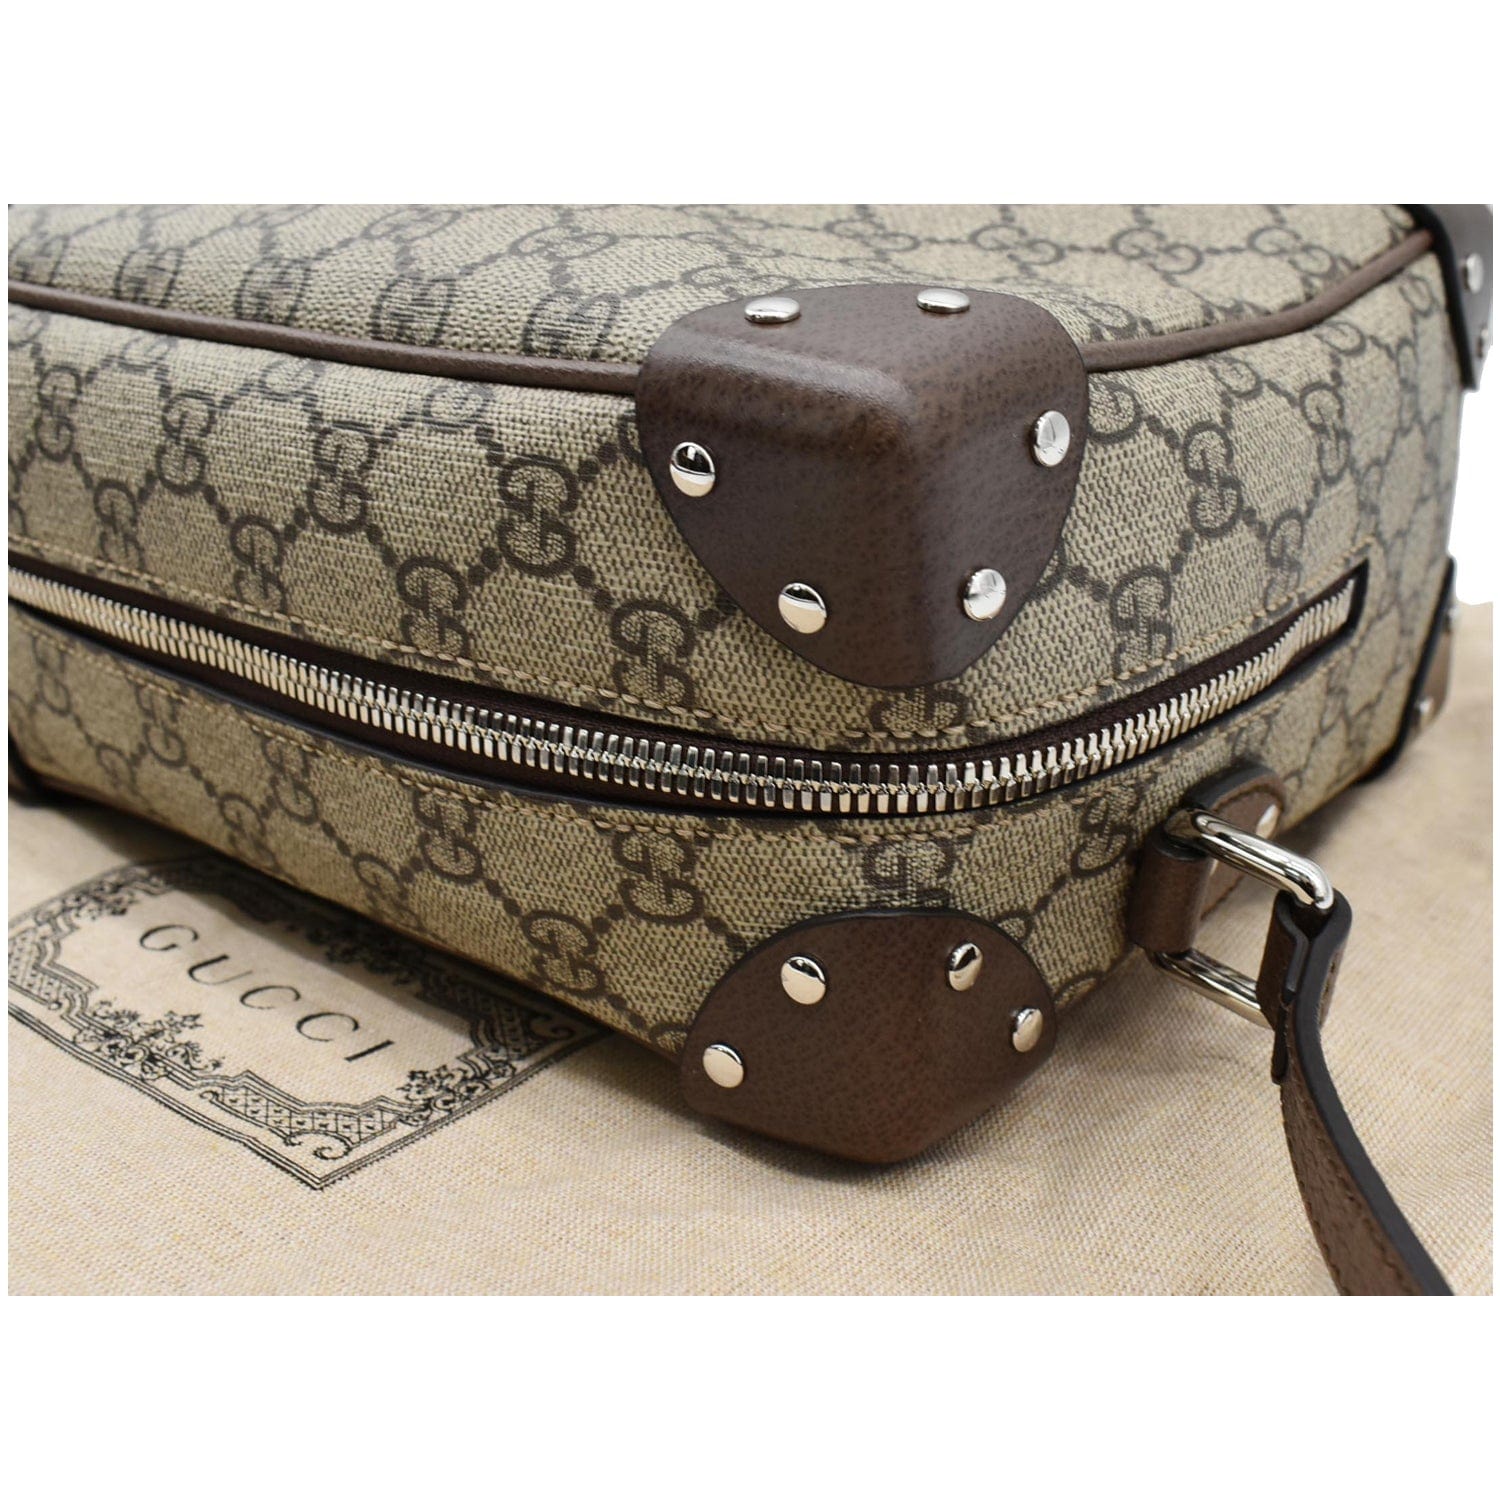 Vintage Gucci Carry On Luggage With Monogram Print